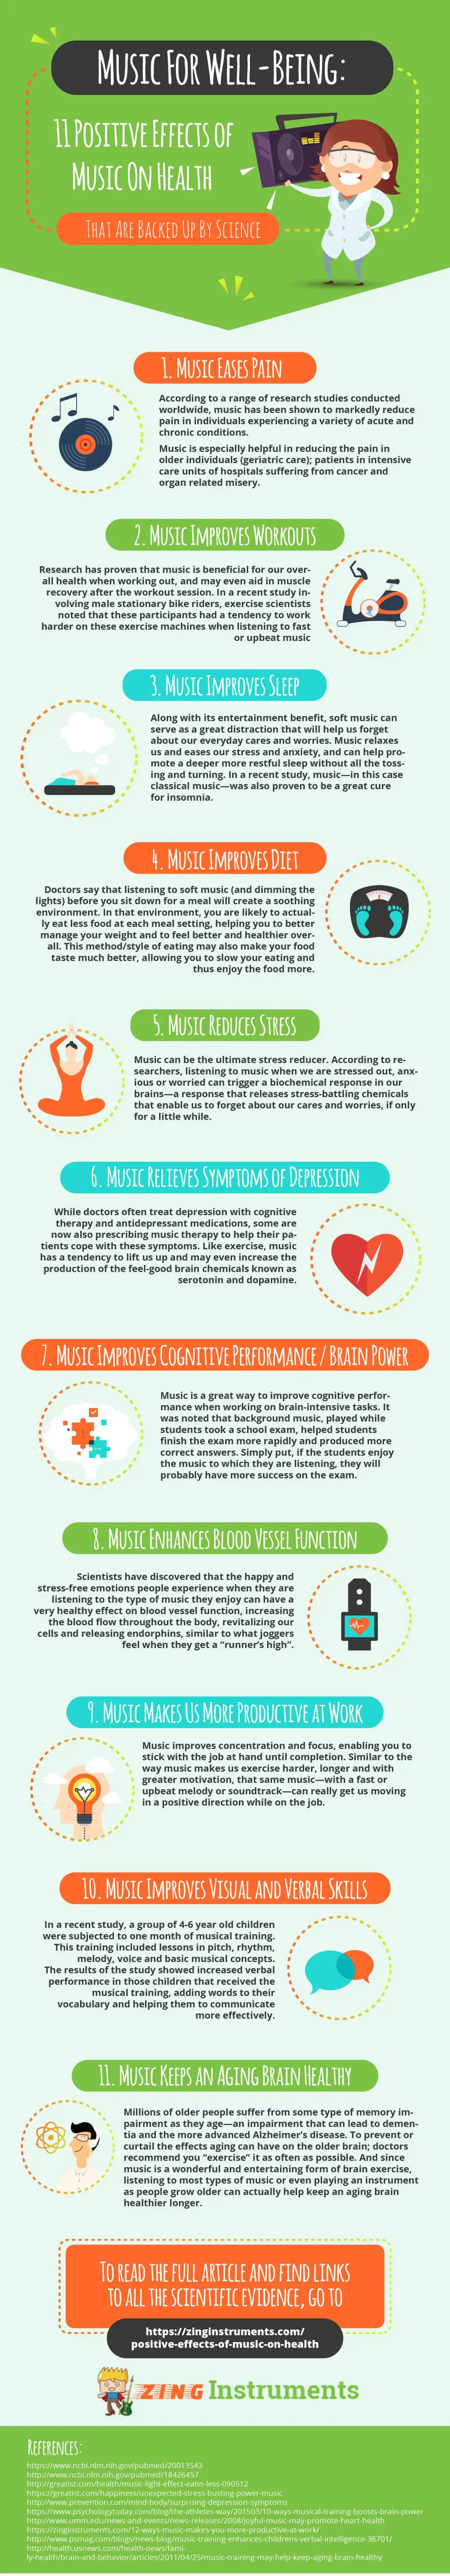 Music has the power to positively impact you in so many ways - mind, body and soul. Here are 11 ways that music can support your physical health in particular.